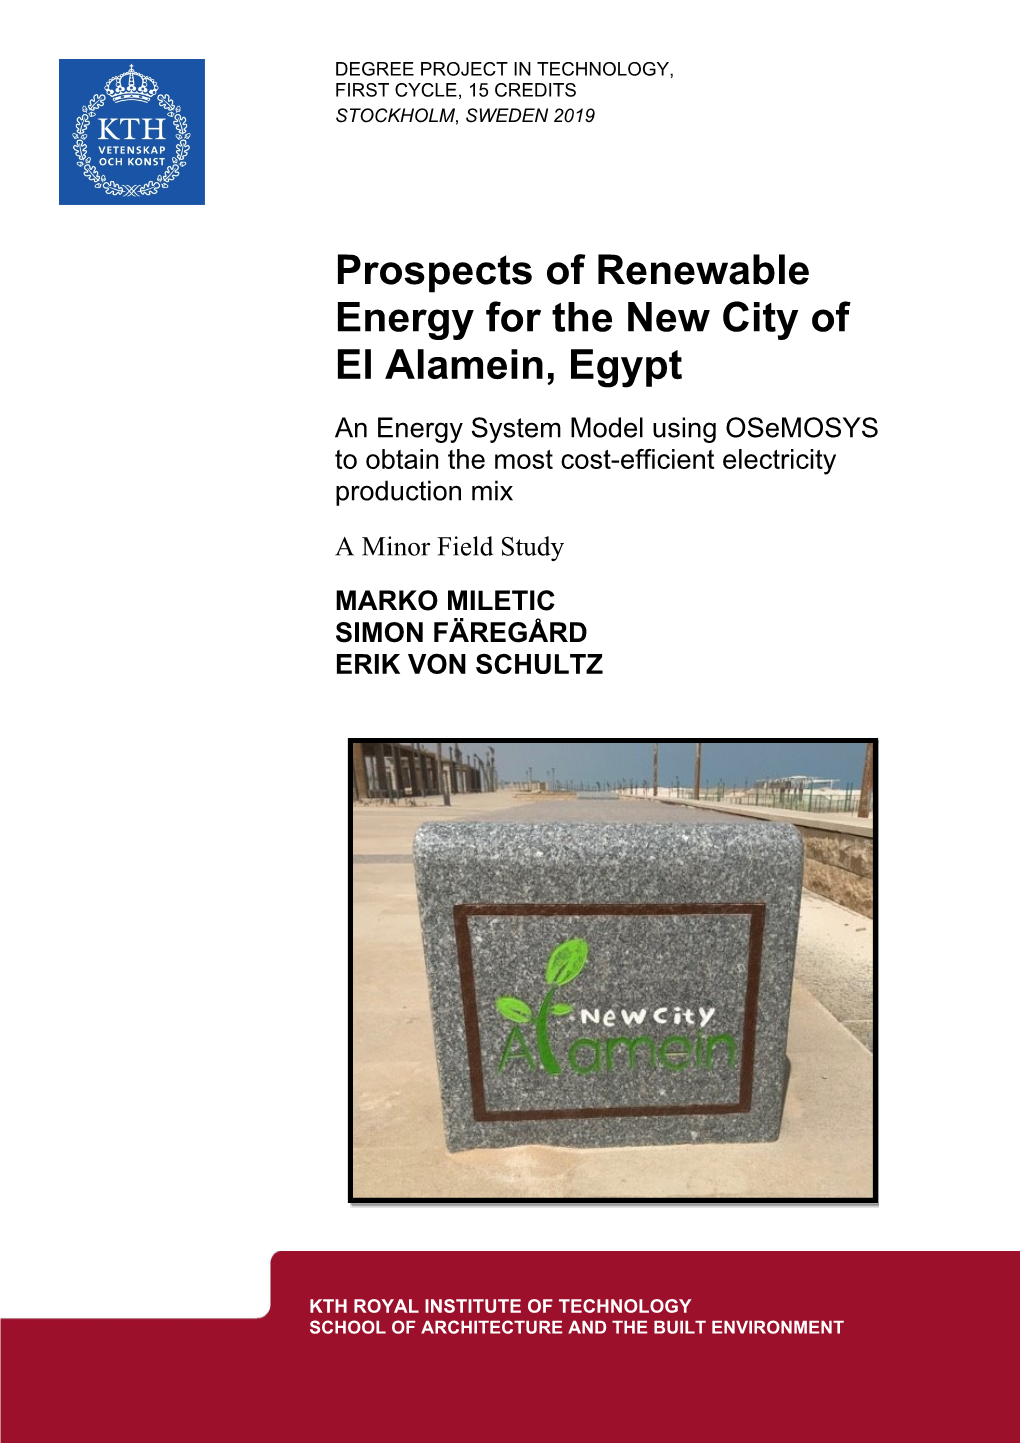 Prospects of Renewable Energy for the New City of El Alamein, Egypt